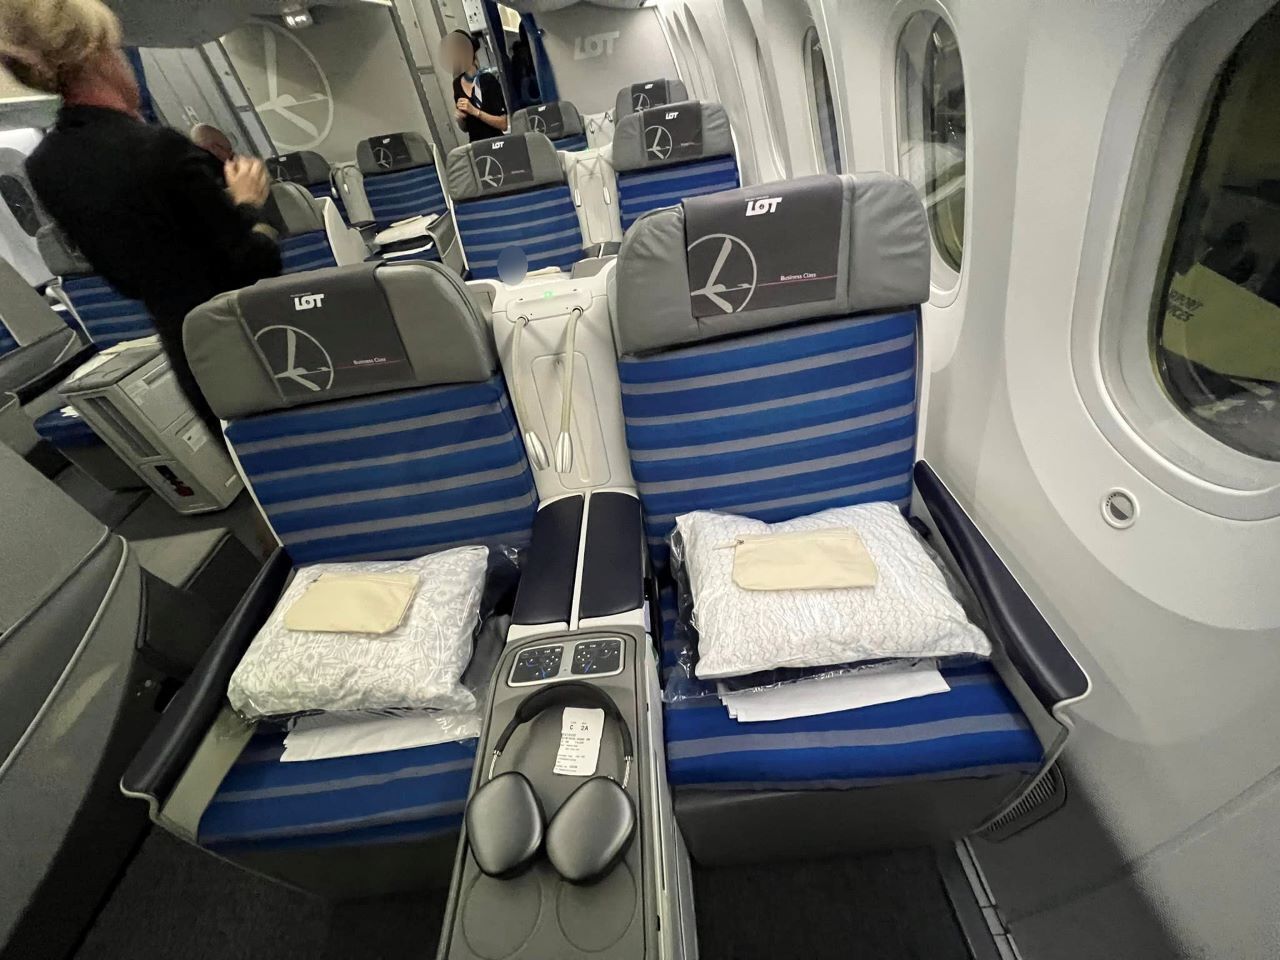 LOT Polish Airlines Business Class Seat 